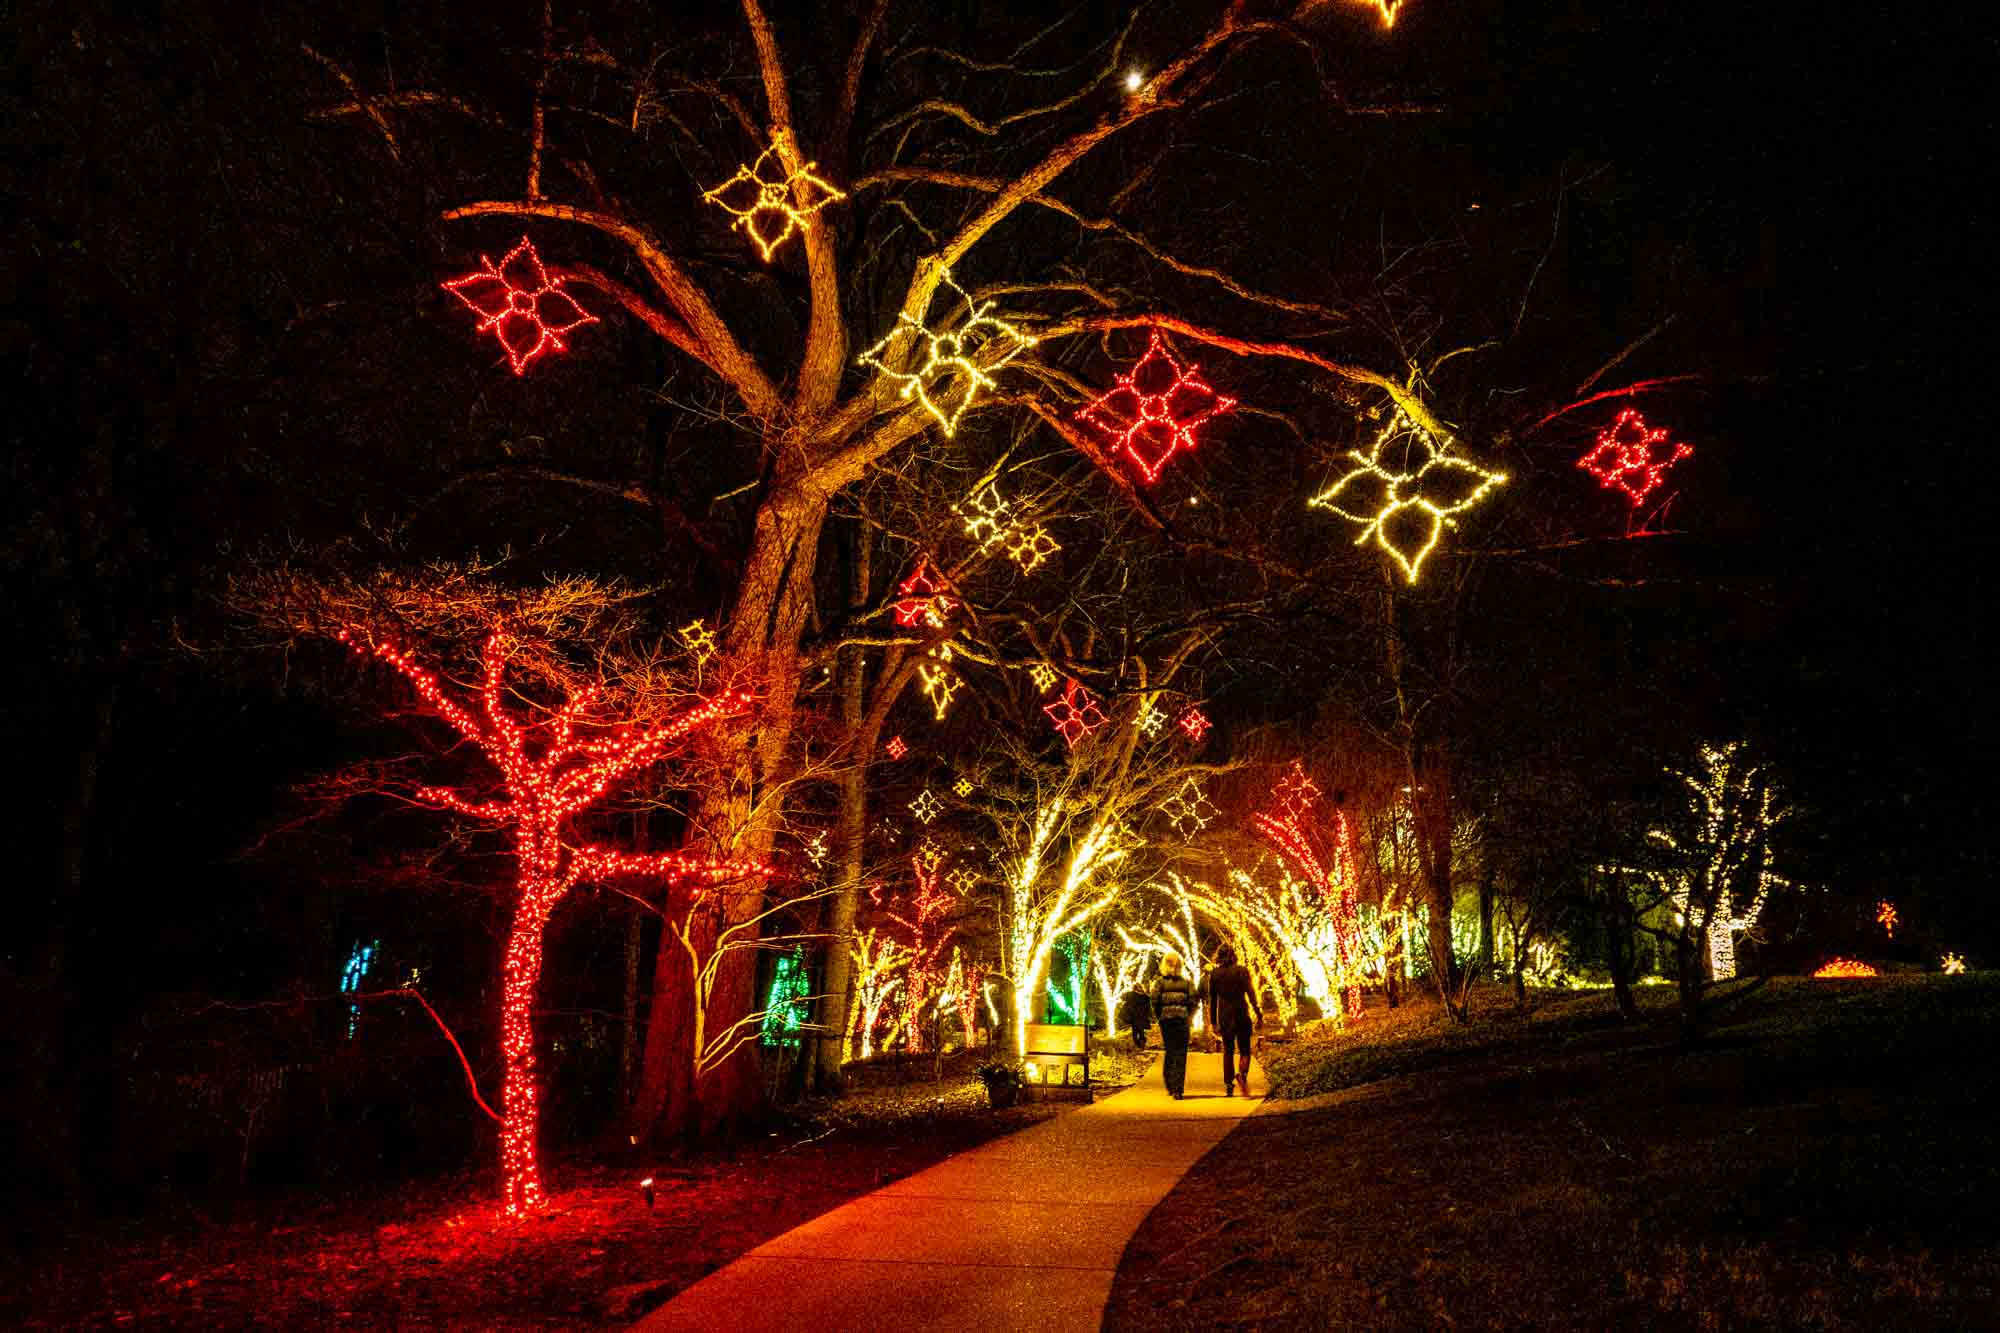 People on a path underneath trees decorated with yellow and red Christmas lights.